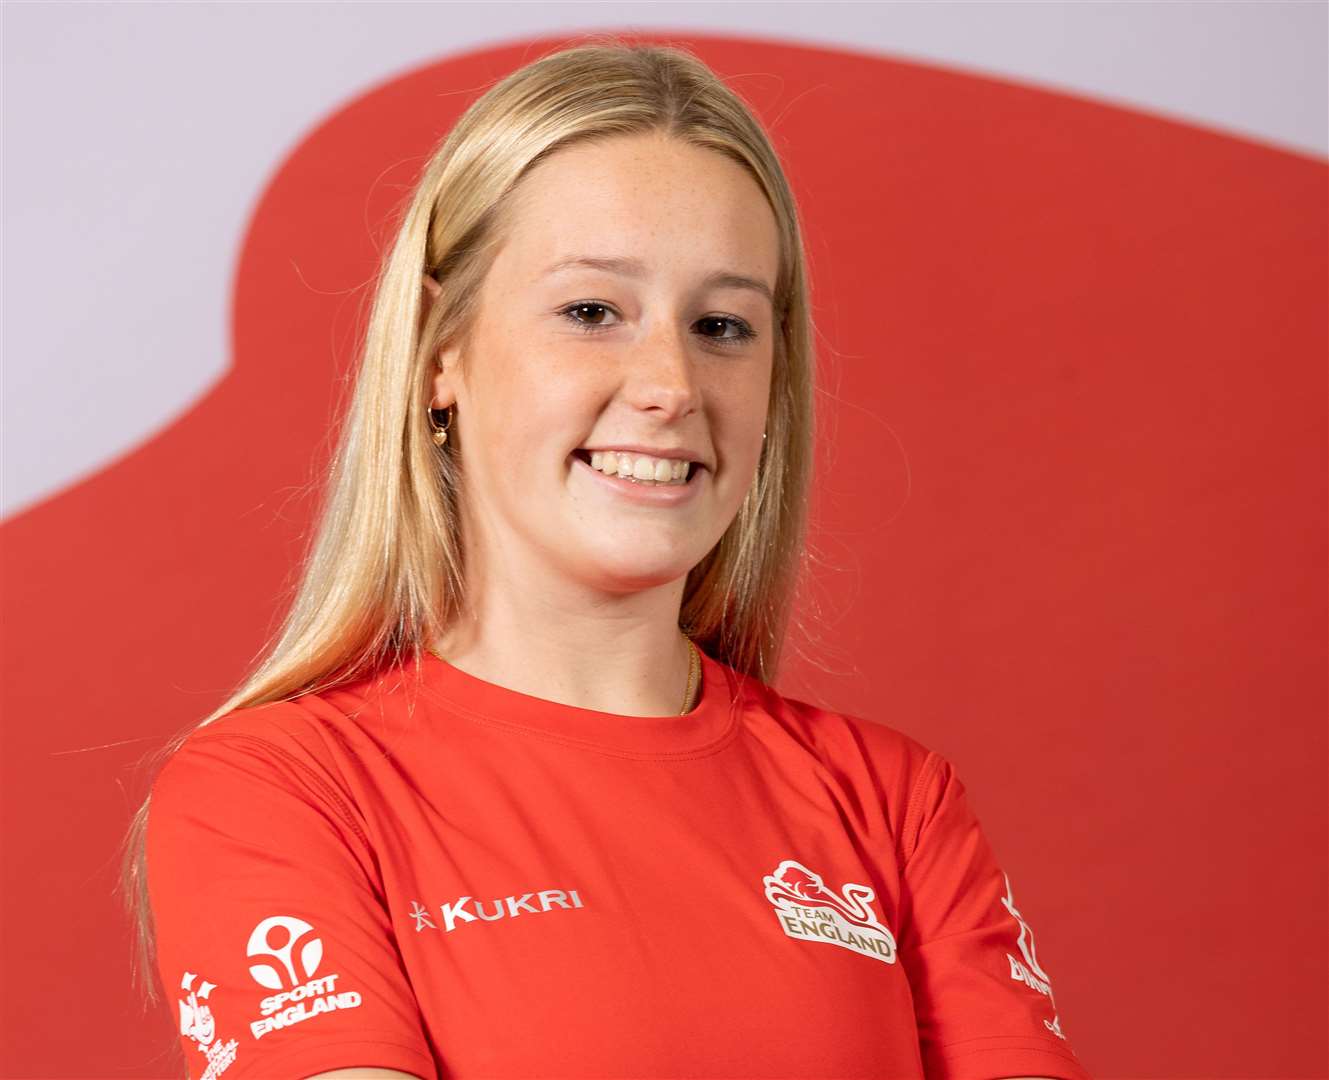 Evie Smith - produced a personal best to finish 10th at the 2022 Commonwealth Games in Birmingham. Picture: Sam Mellish/Team England